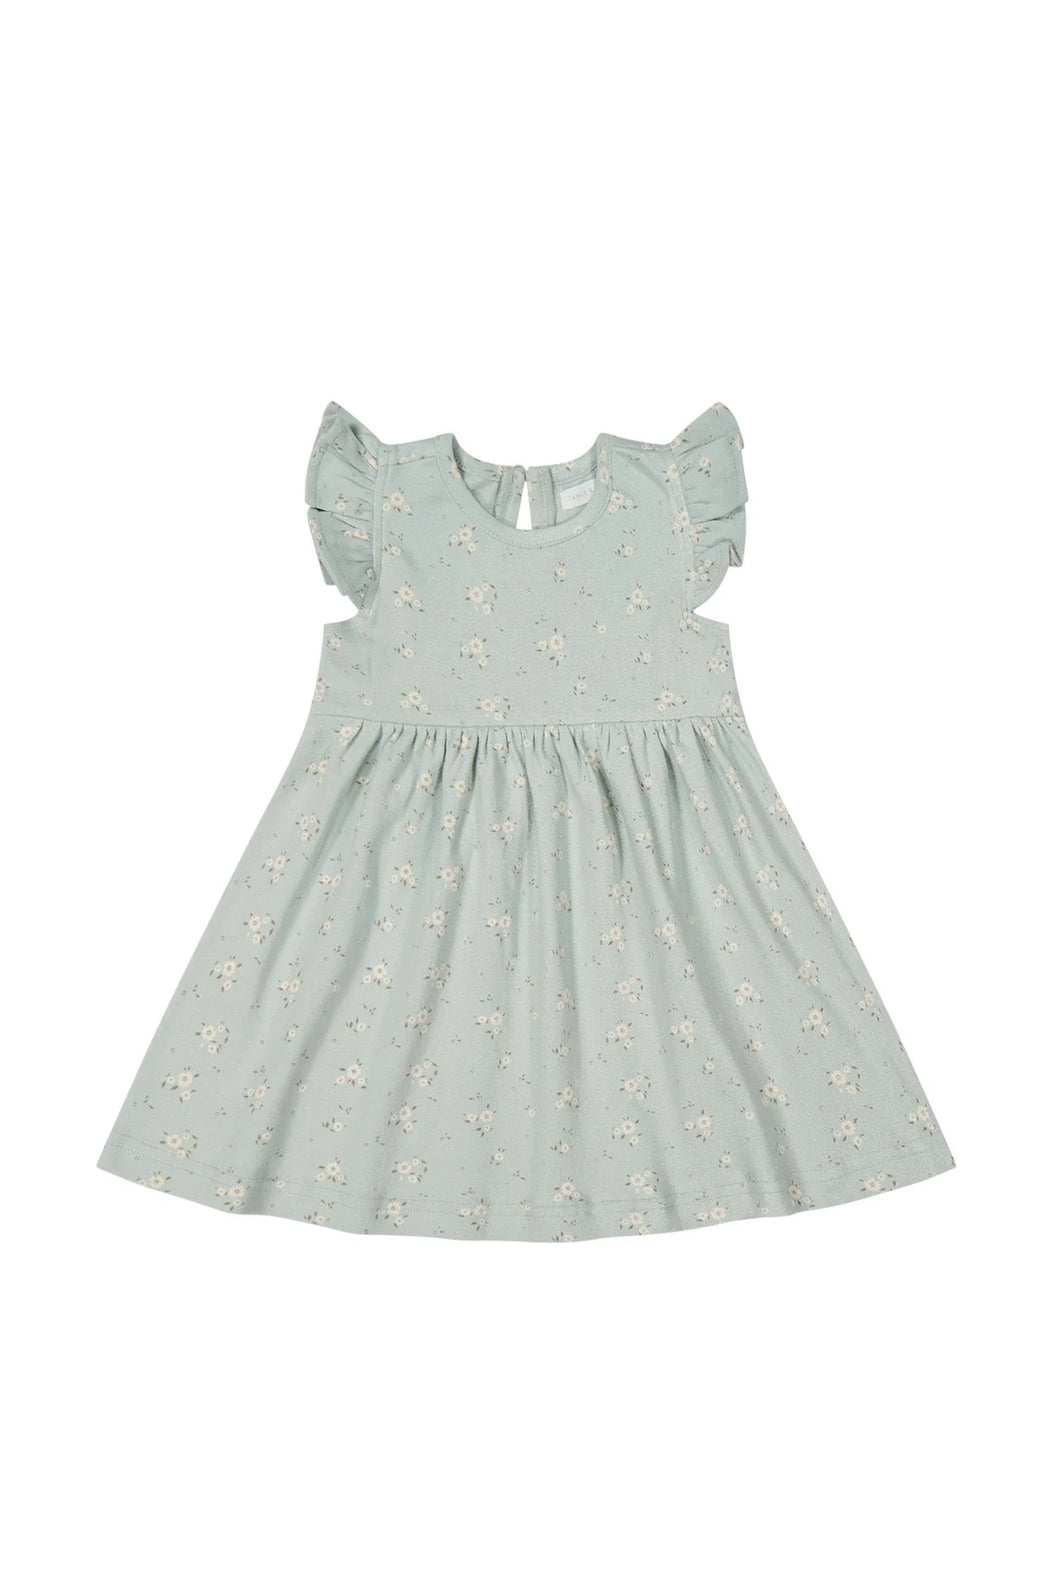 Baby Blue dress with flutter sleeves and a white floral all over print. 